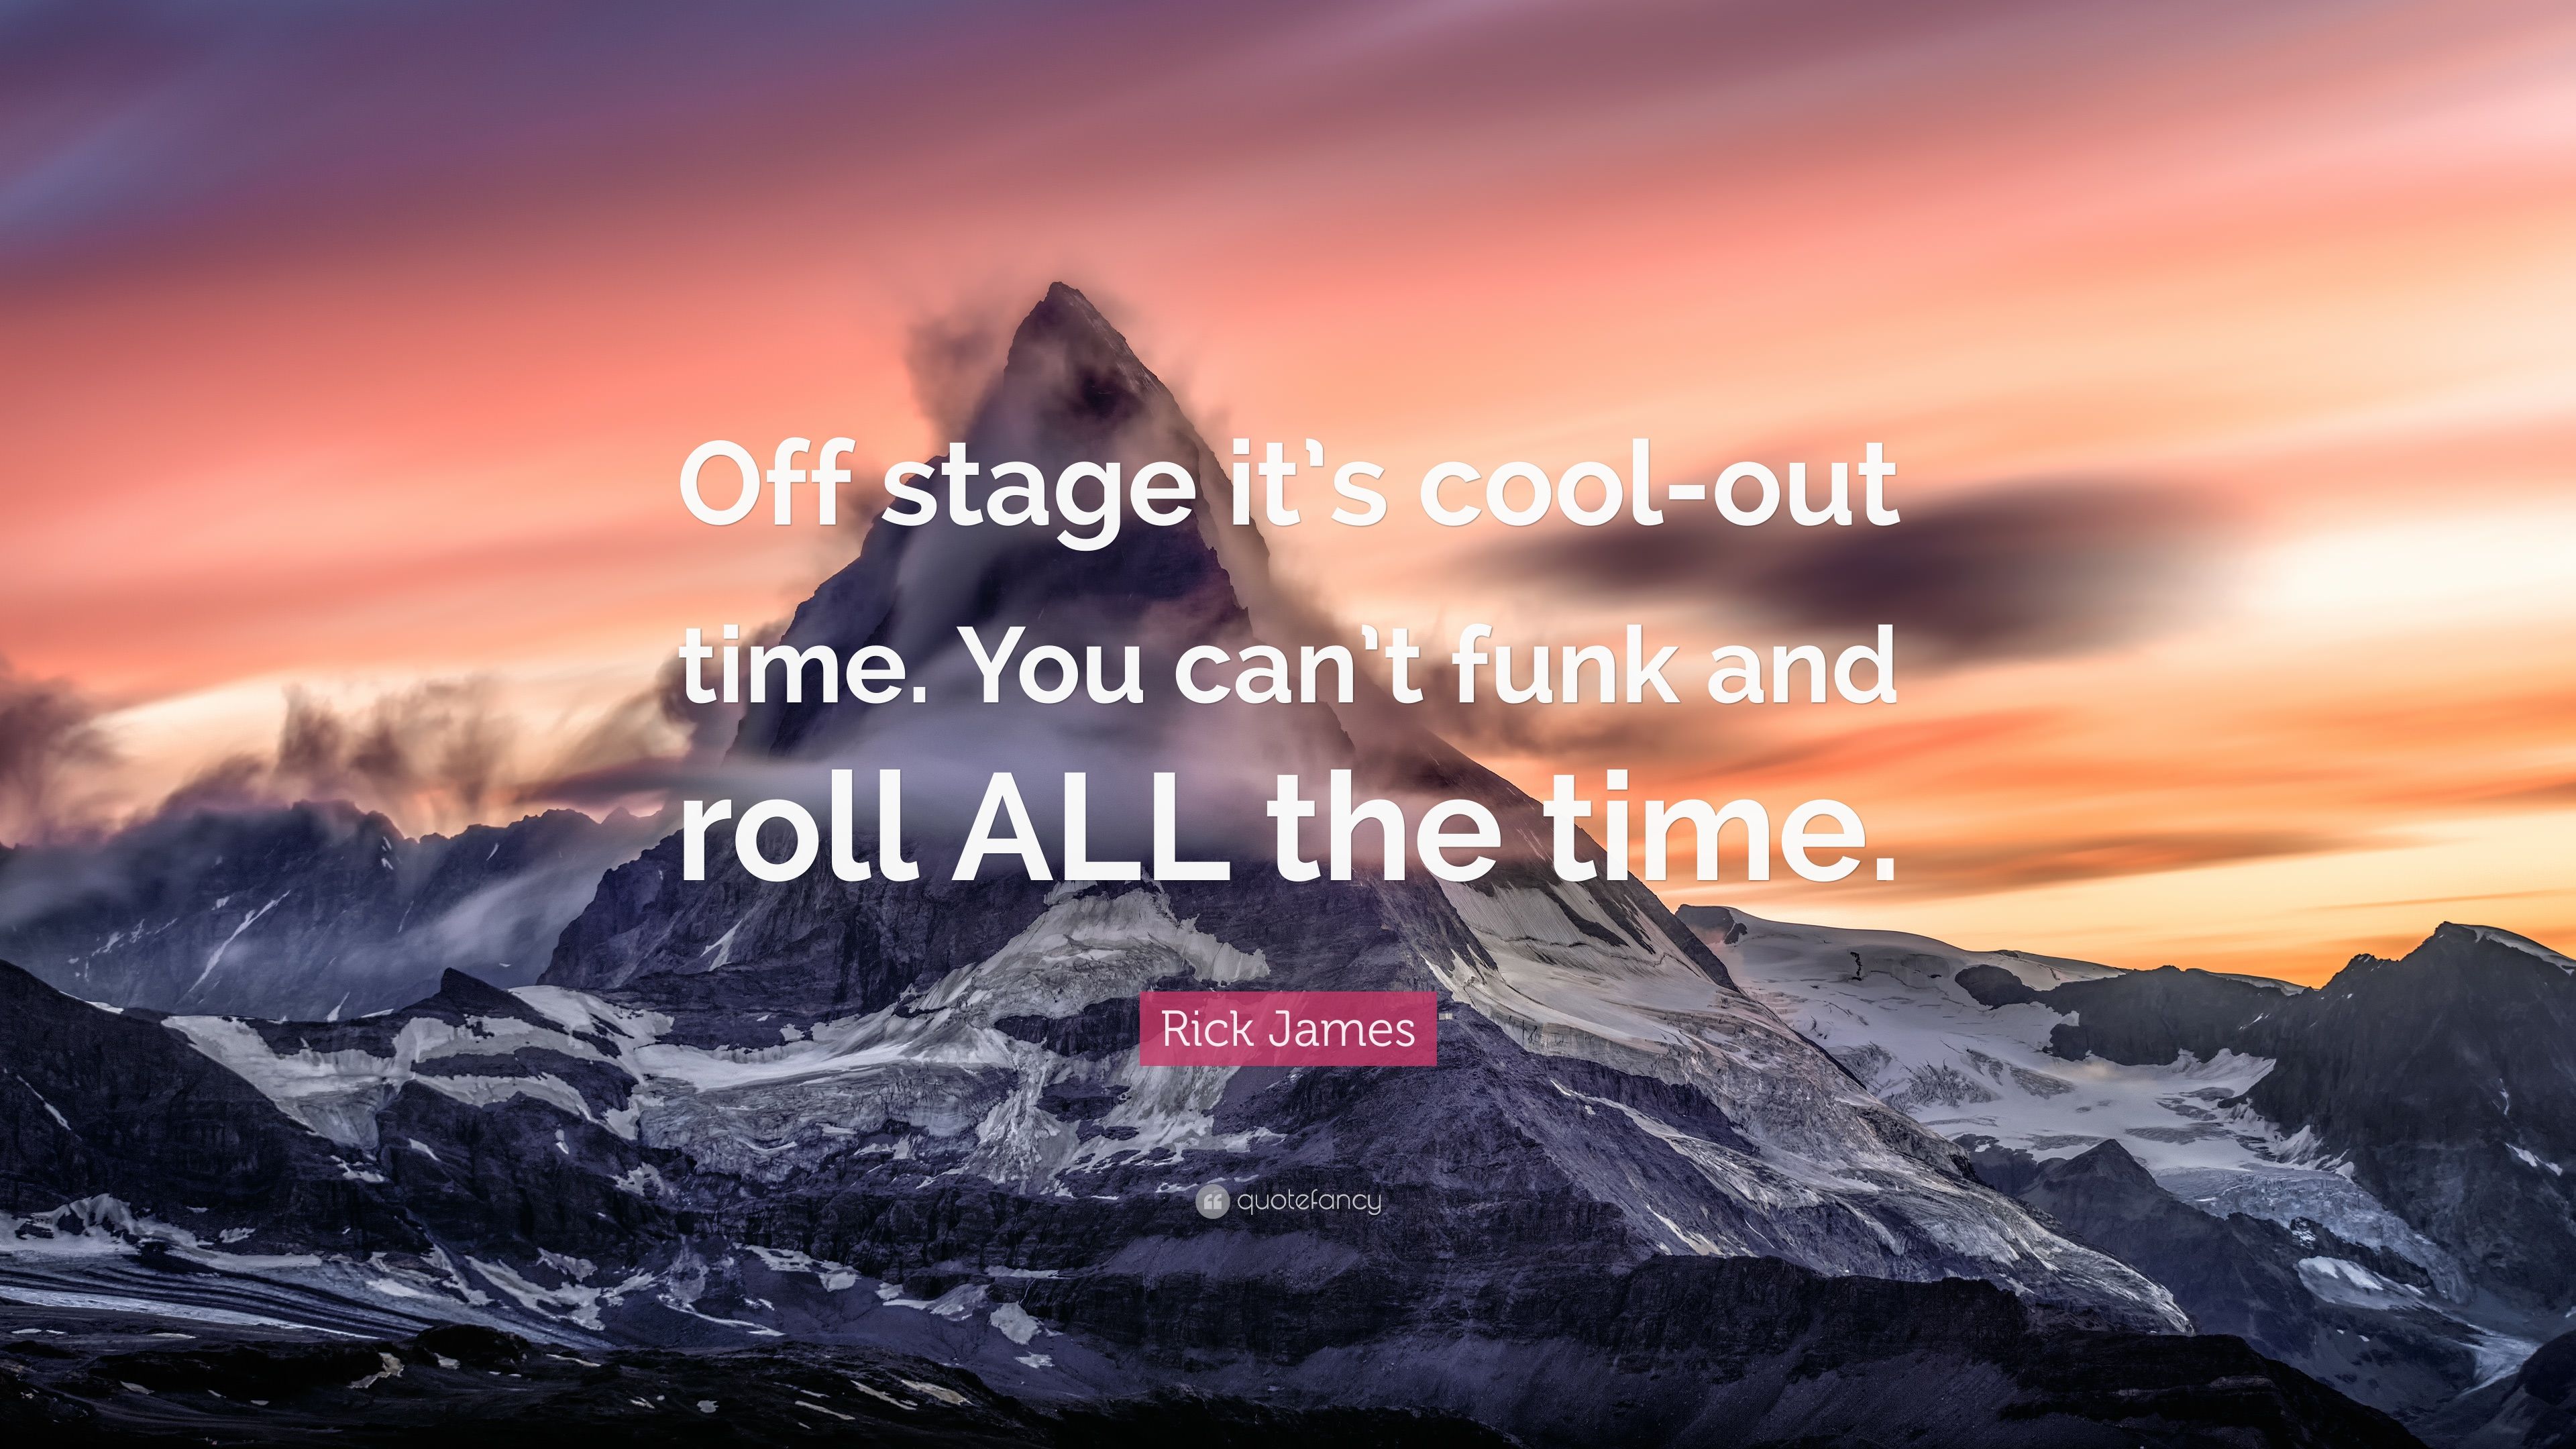 Rick James Quote: “Off Stage It's Cool Out Time. You Can't Funk And Roll ALL